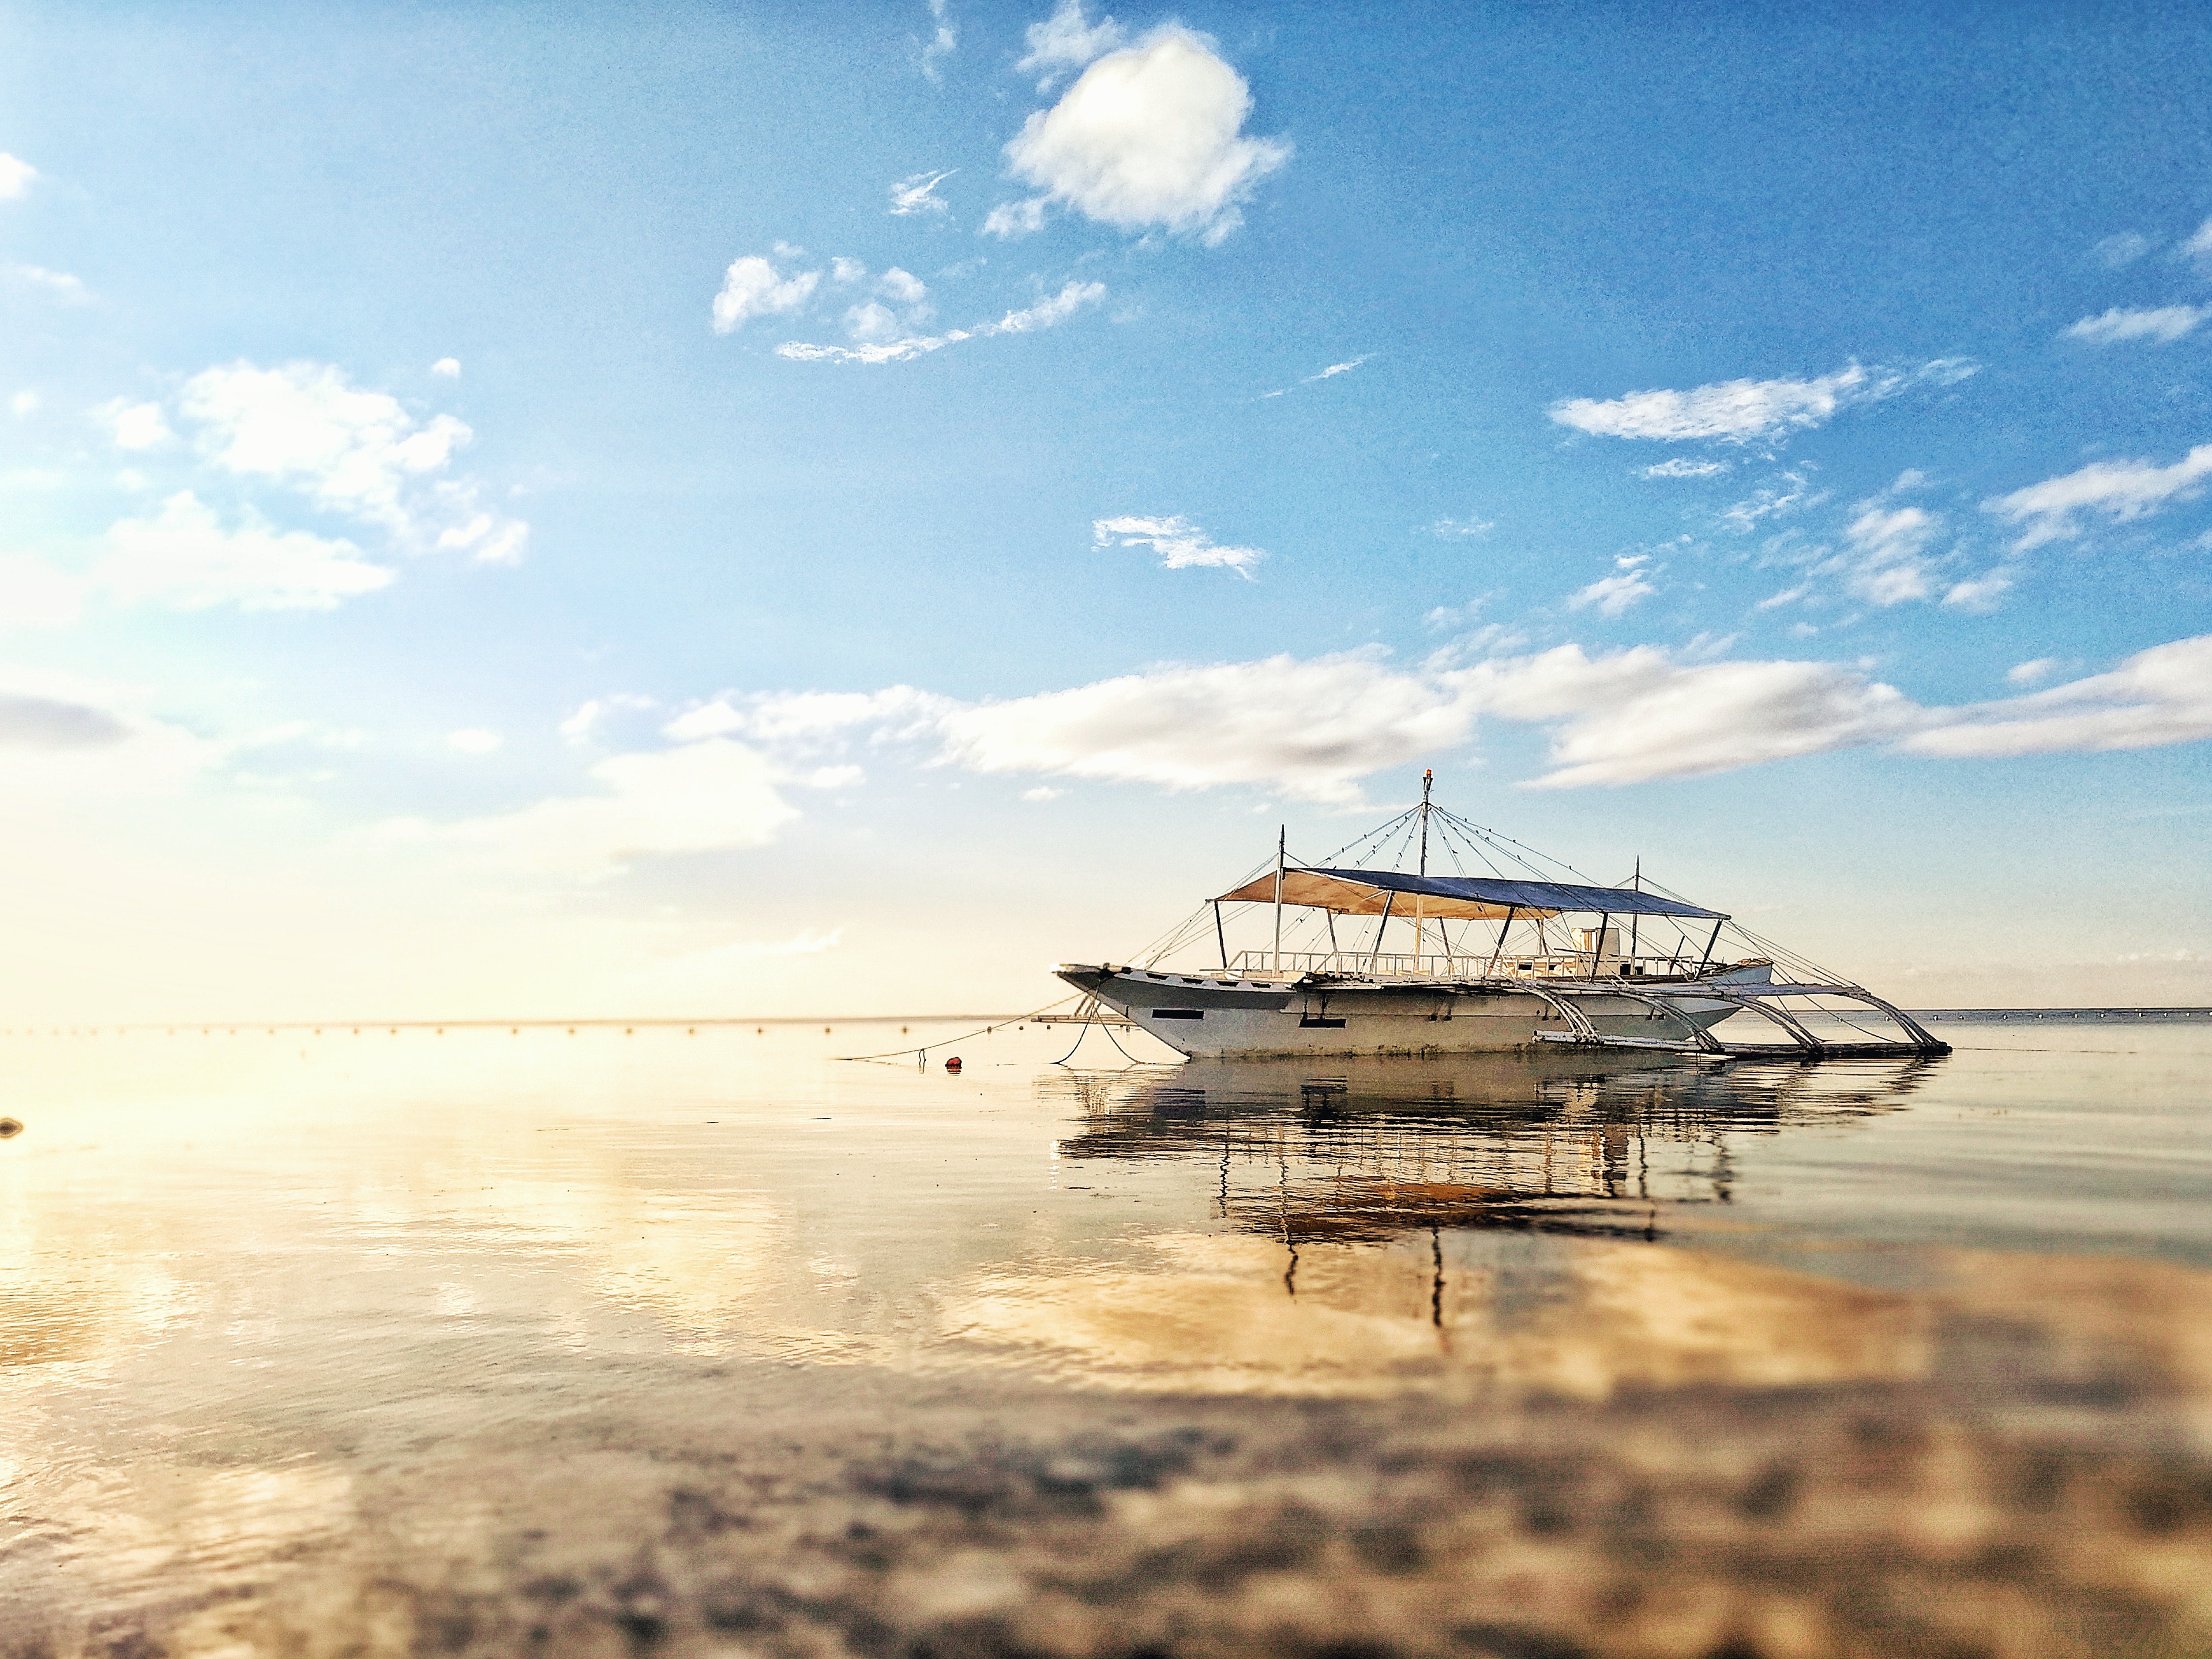 White Boat on Sea during Sunrise, Beach, Reflection, Water, Sky, HQ Photo